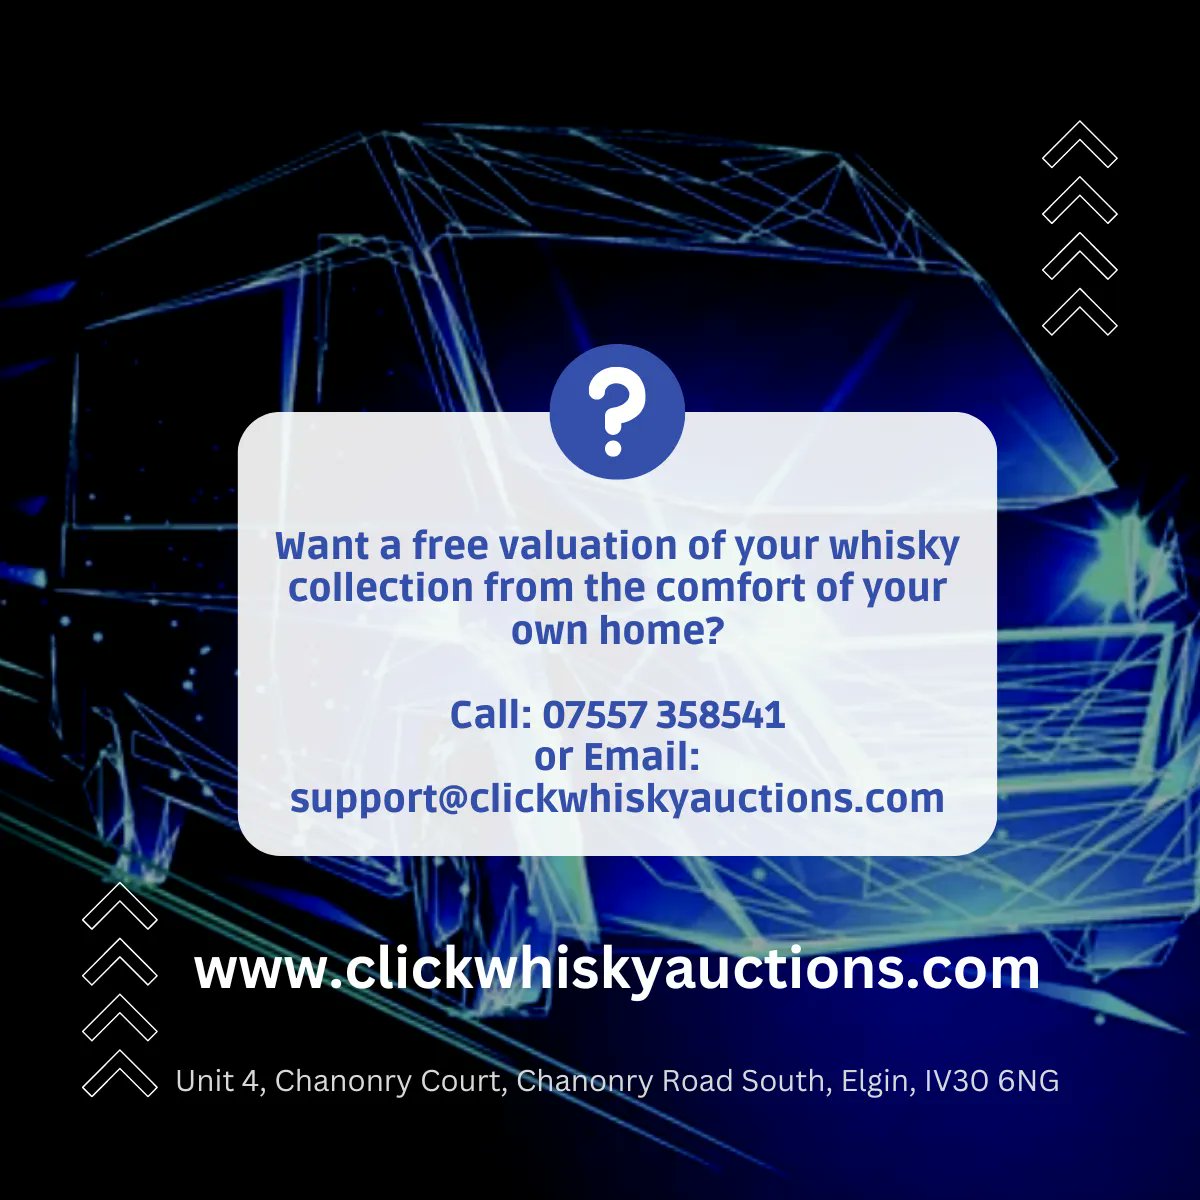 Let us come to you. For large or valuable collections. Discretion assured. Non-branded transport for your privacy. Contact us for further details or to book an appointment. #freevaluation #whisky #homevisit #whiskyauction #sellwhisky #clickwhisky #clickwhiskyauctions